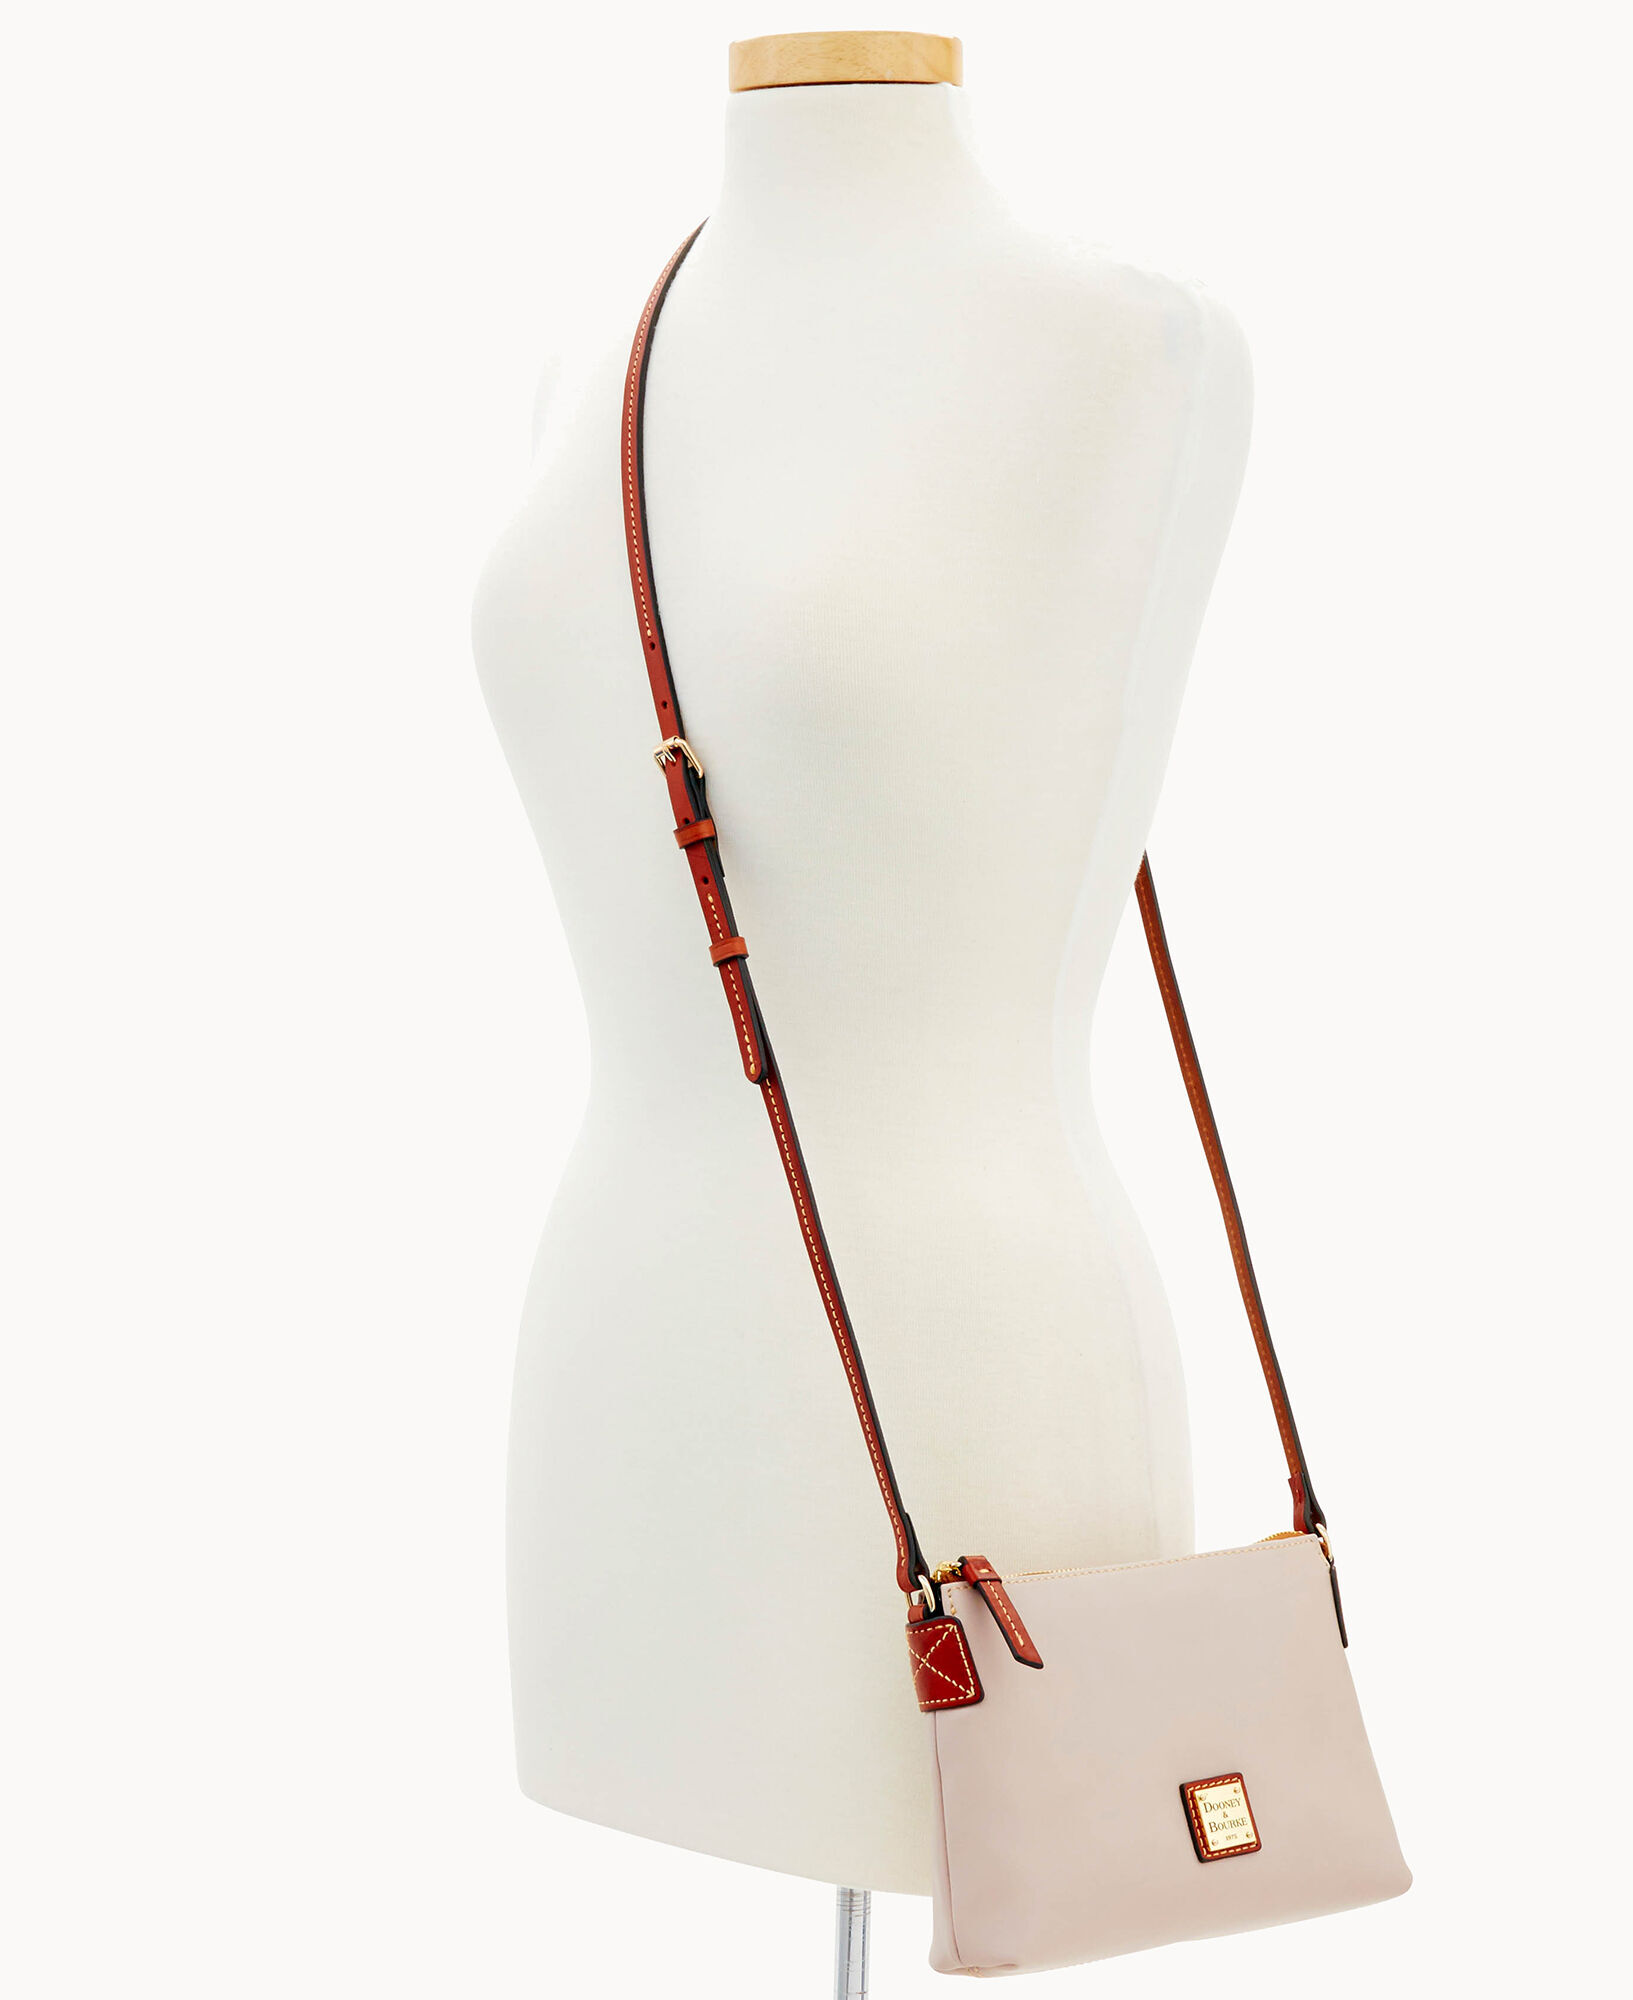 Dooney and Bourke Saffiano Leather Crossbody Pouchette - clothing